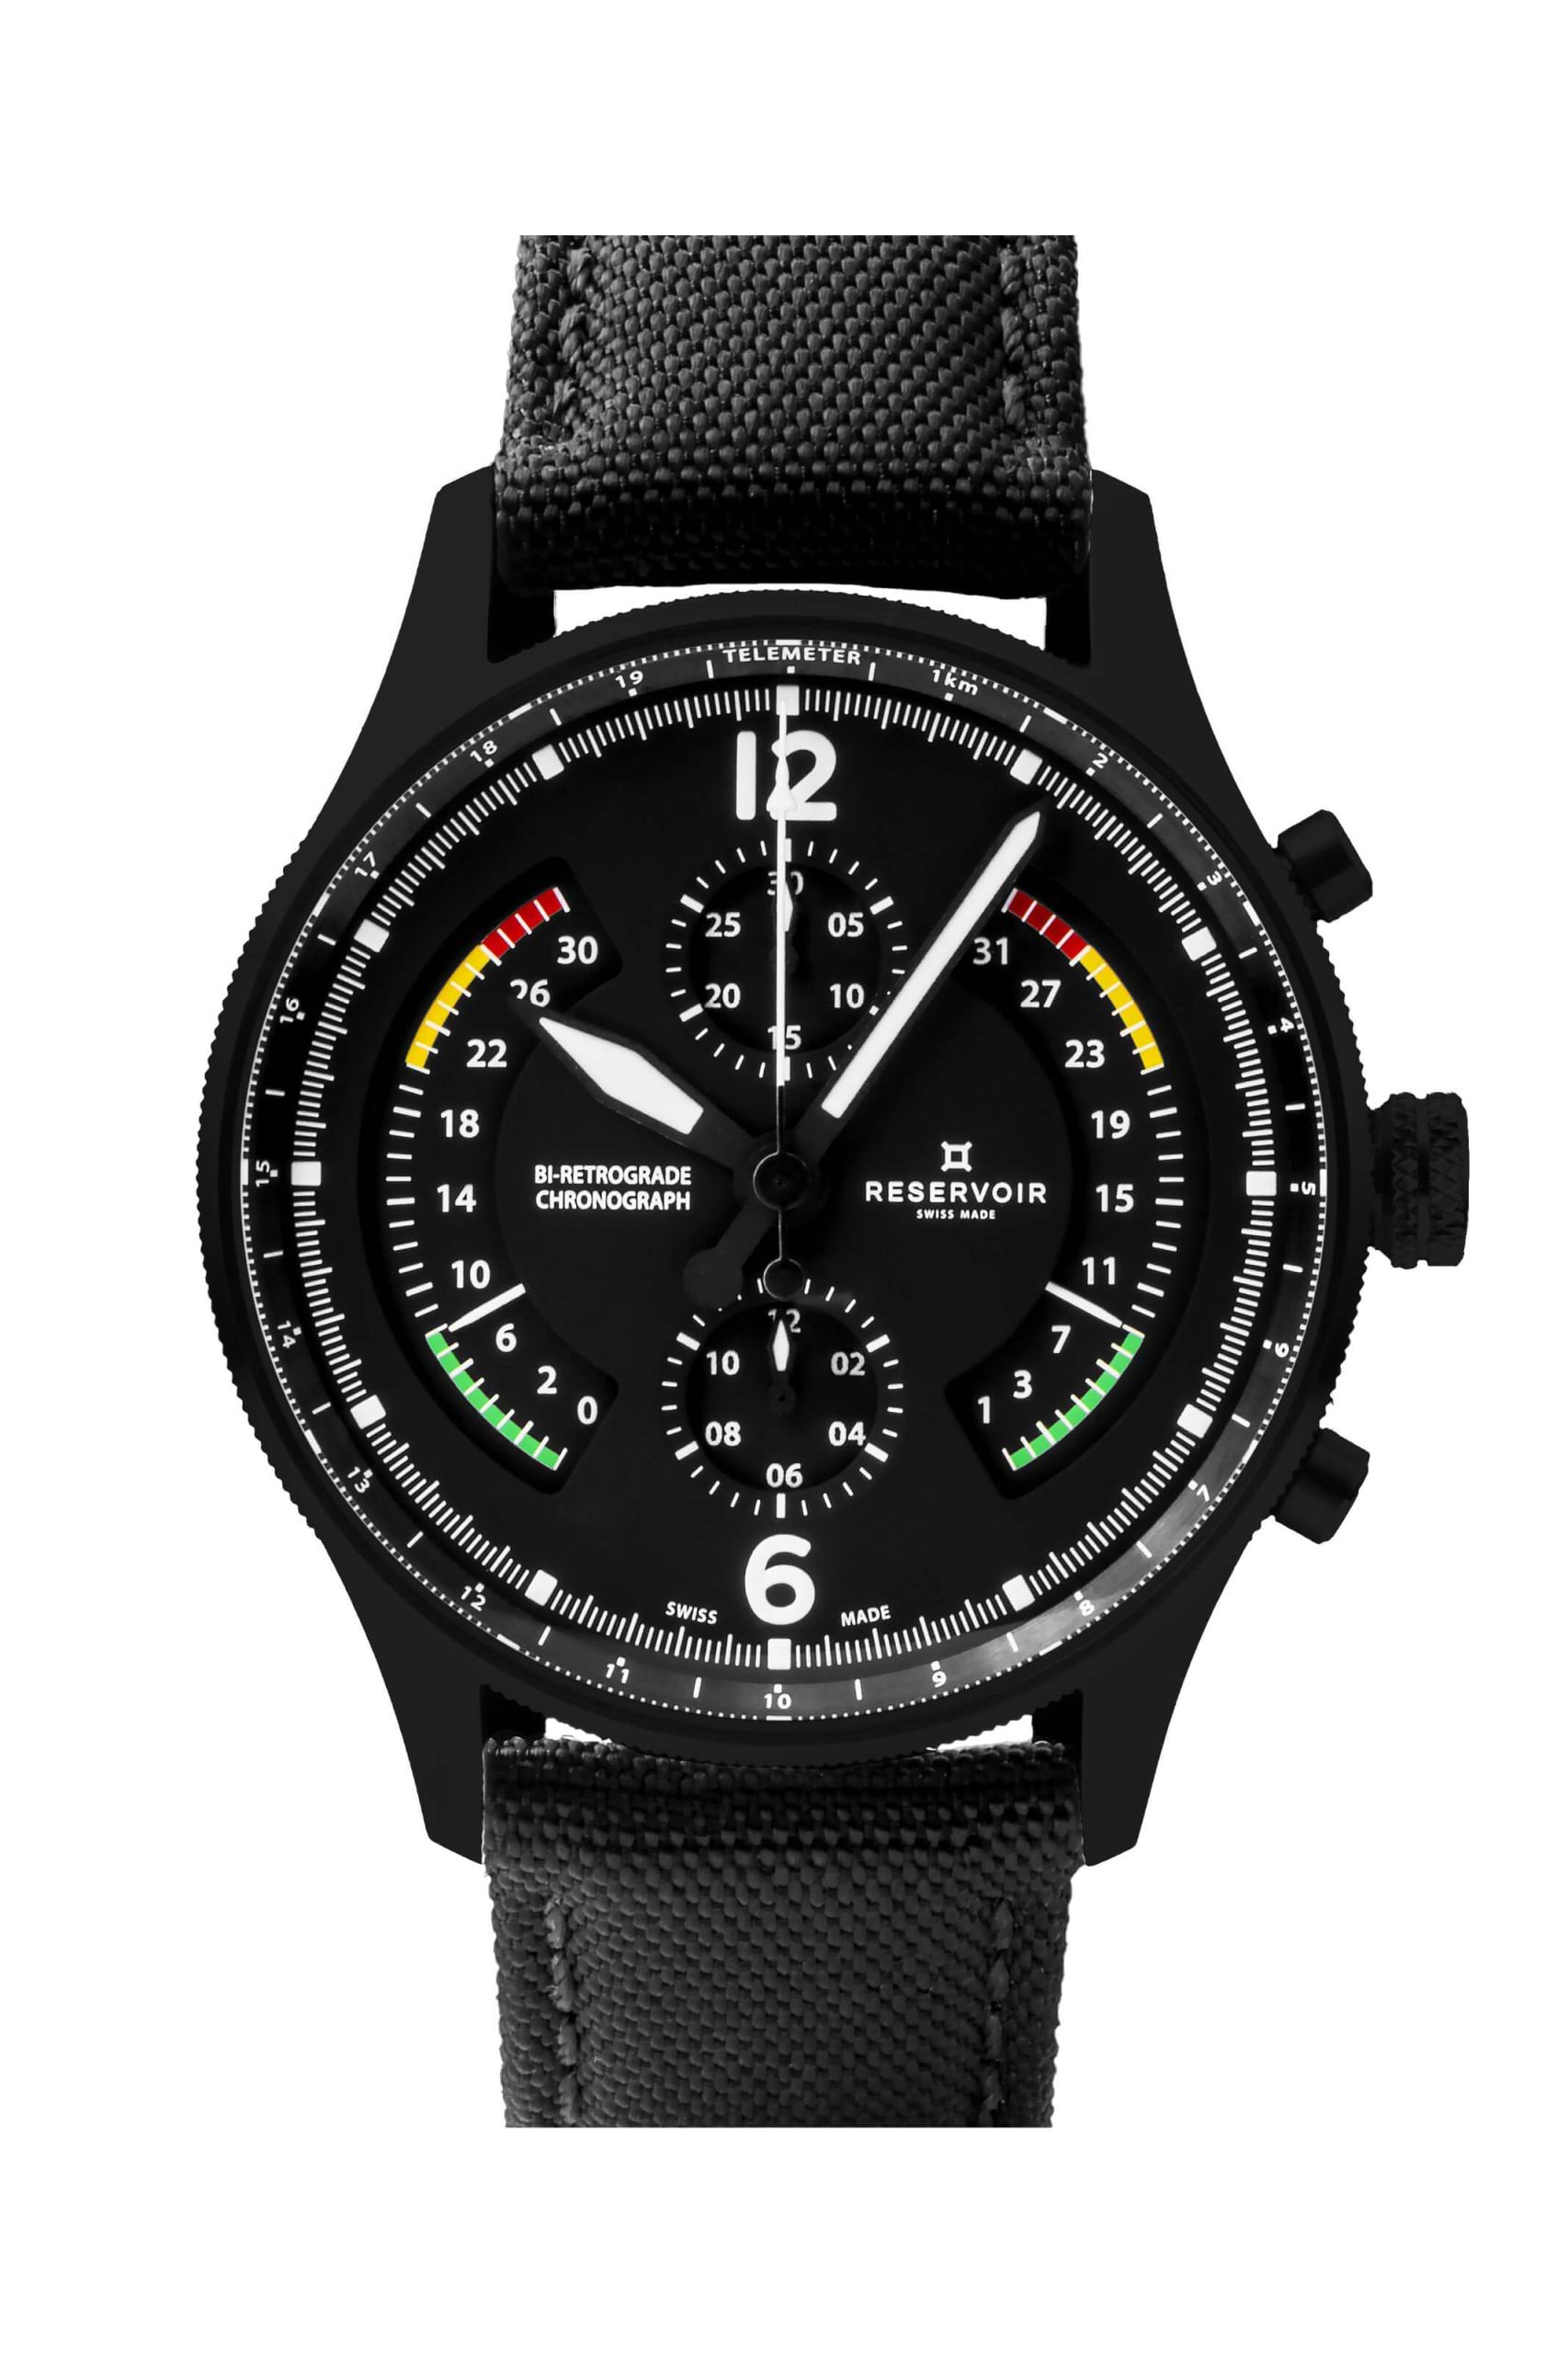 Black Jet Pilot Watch Chronograph with Light Grey and Light Olive Green Details.